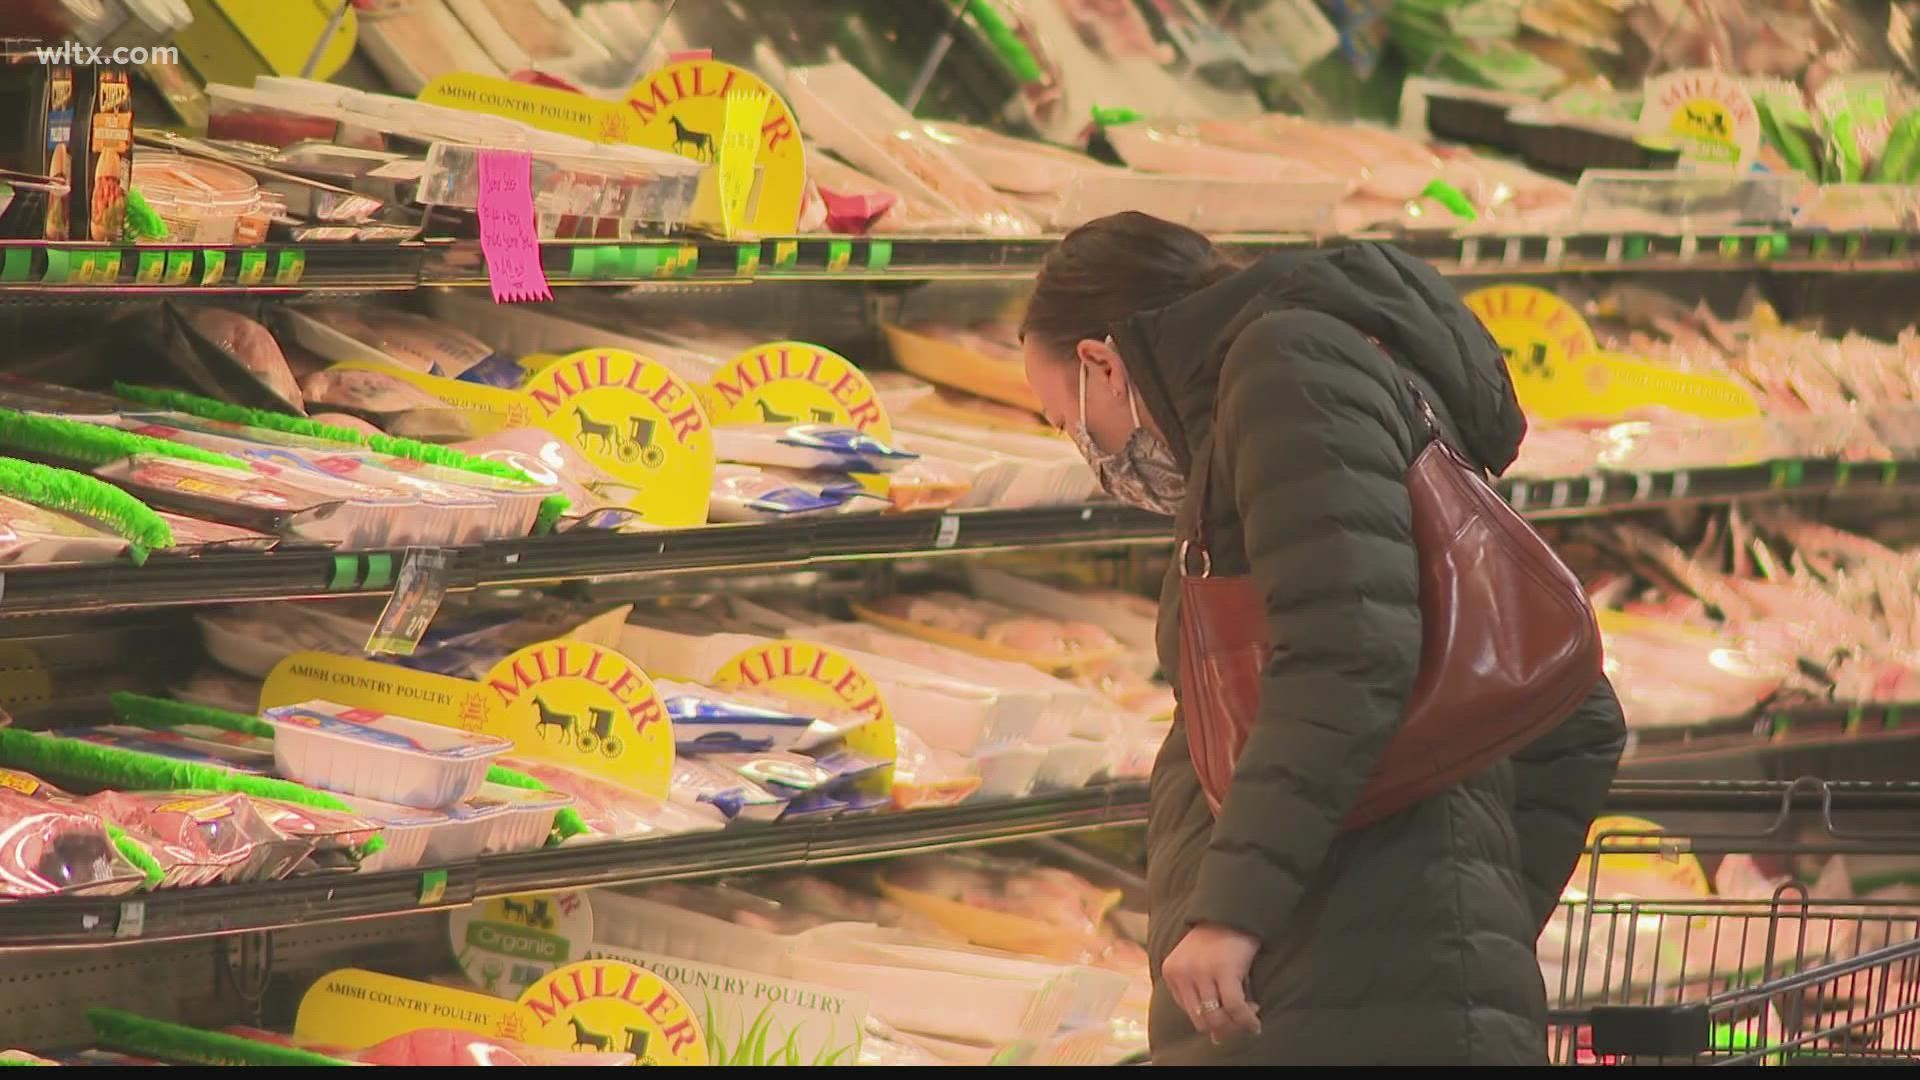 Inflation rates are at historically high levels, and shoppers we spoke with said they are noticing the price hike.